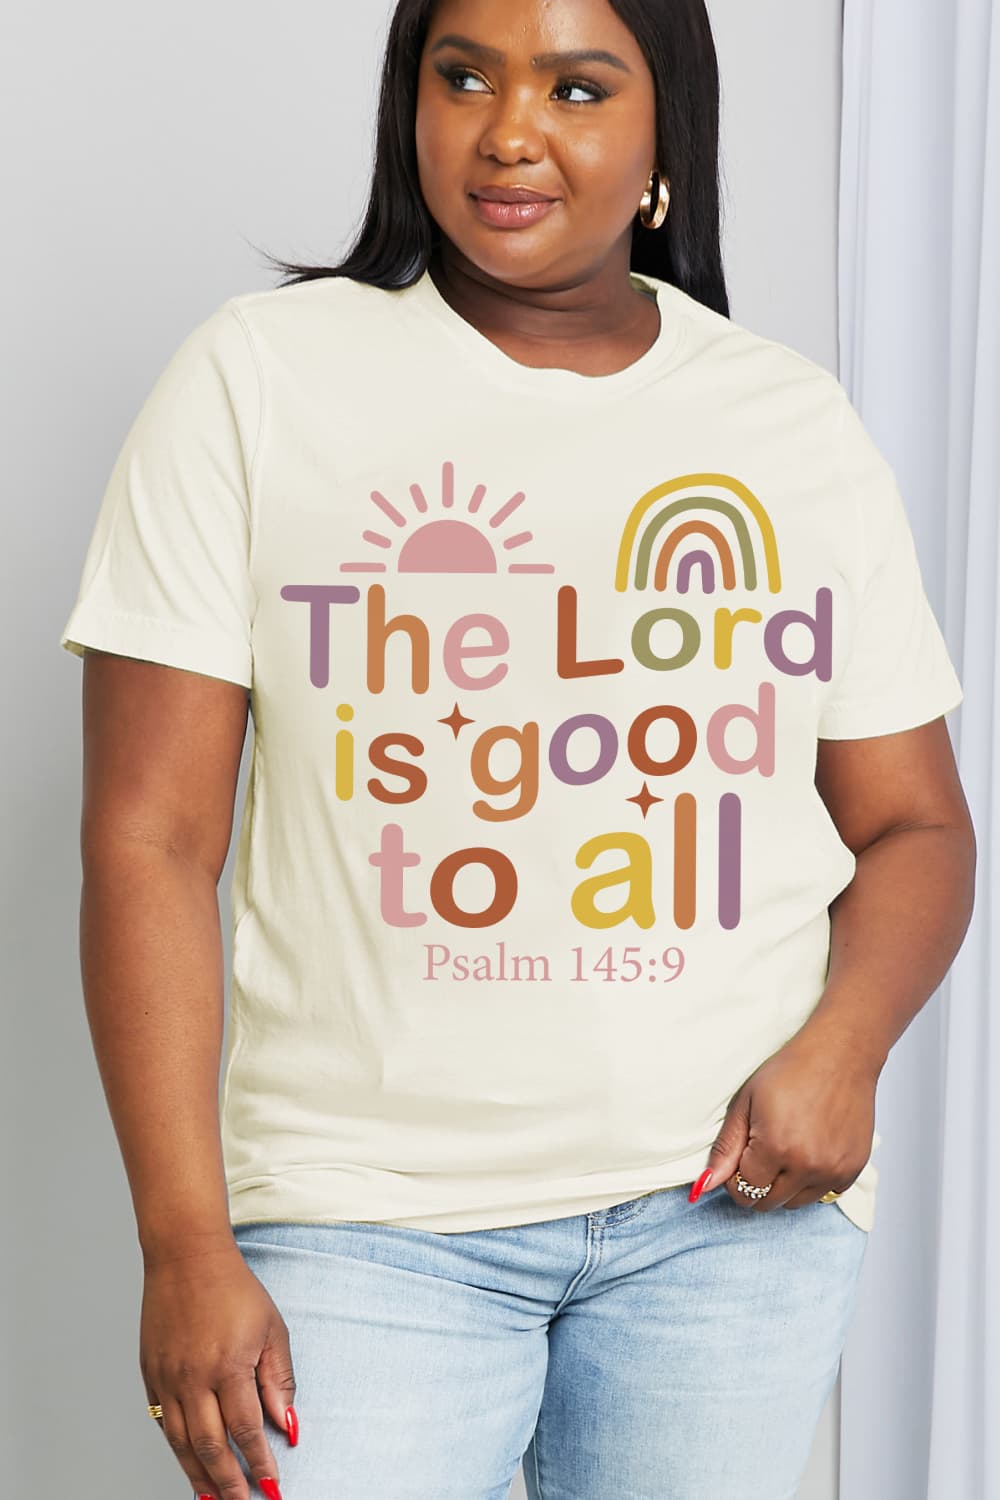 THE LORD IS GOOD TO ALL PSALM 145:9 Graphic Cotton Tee